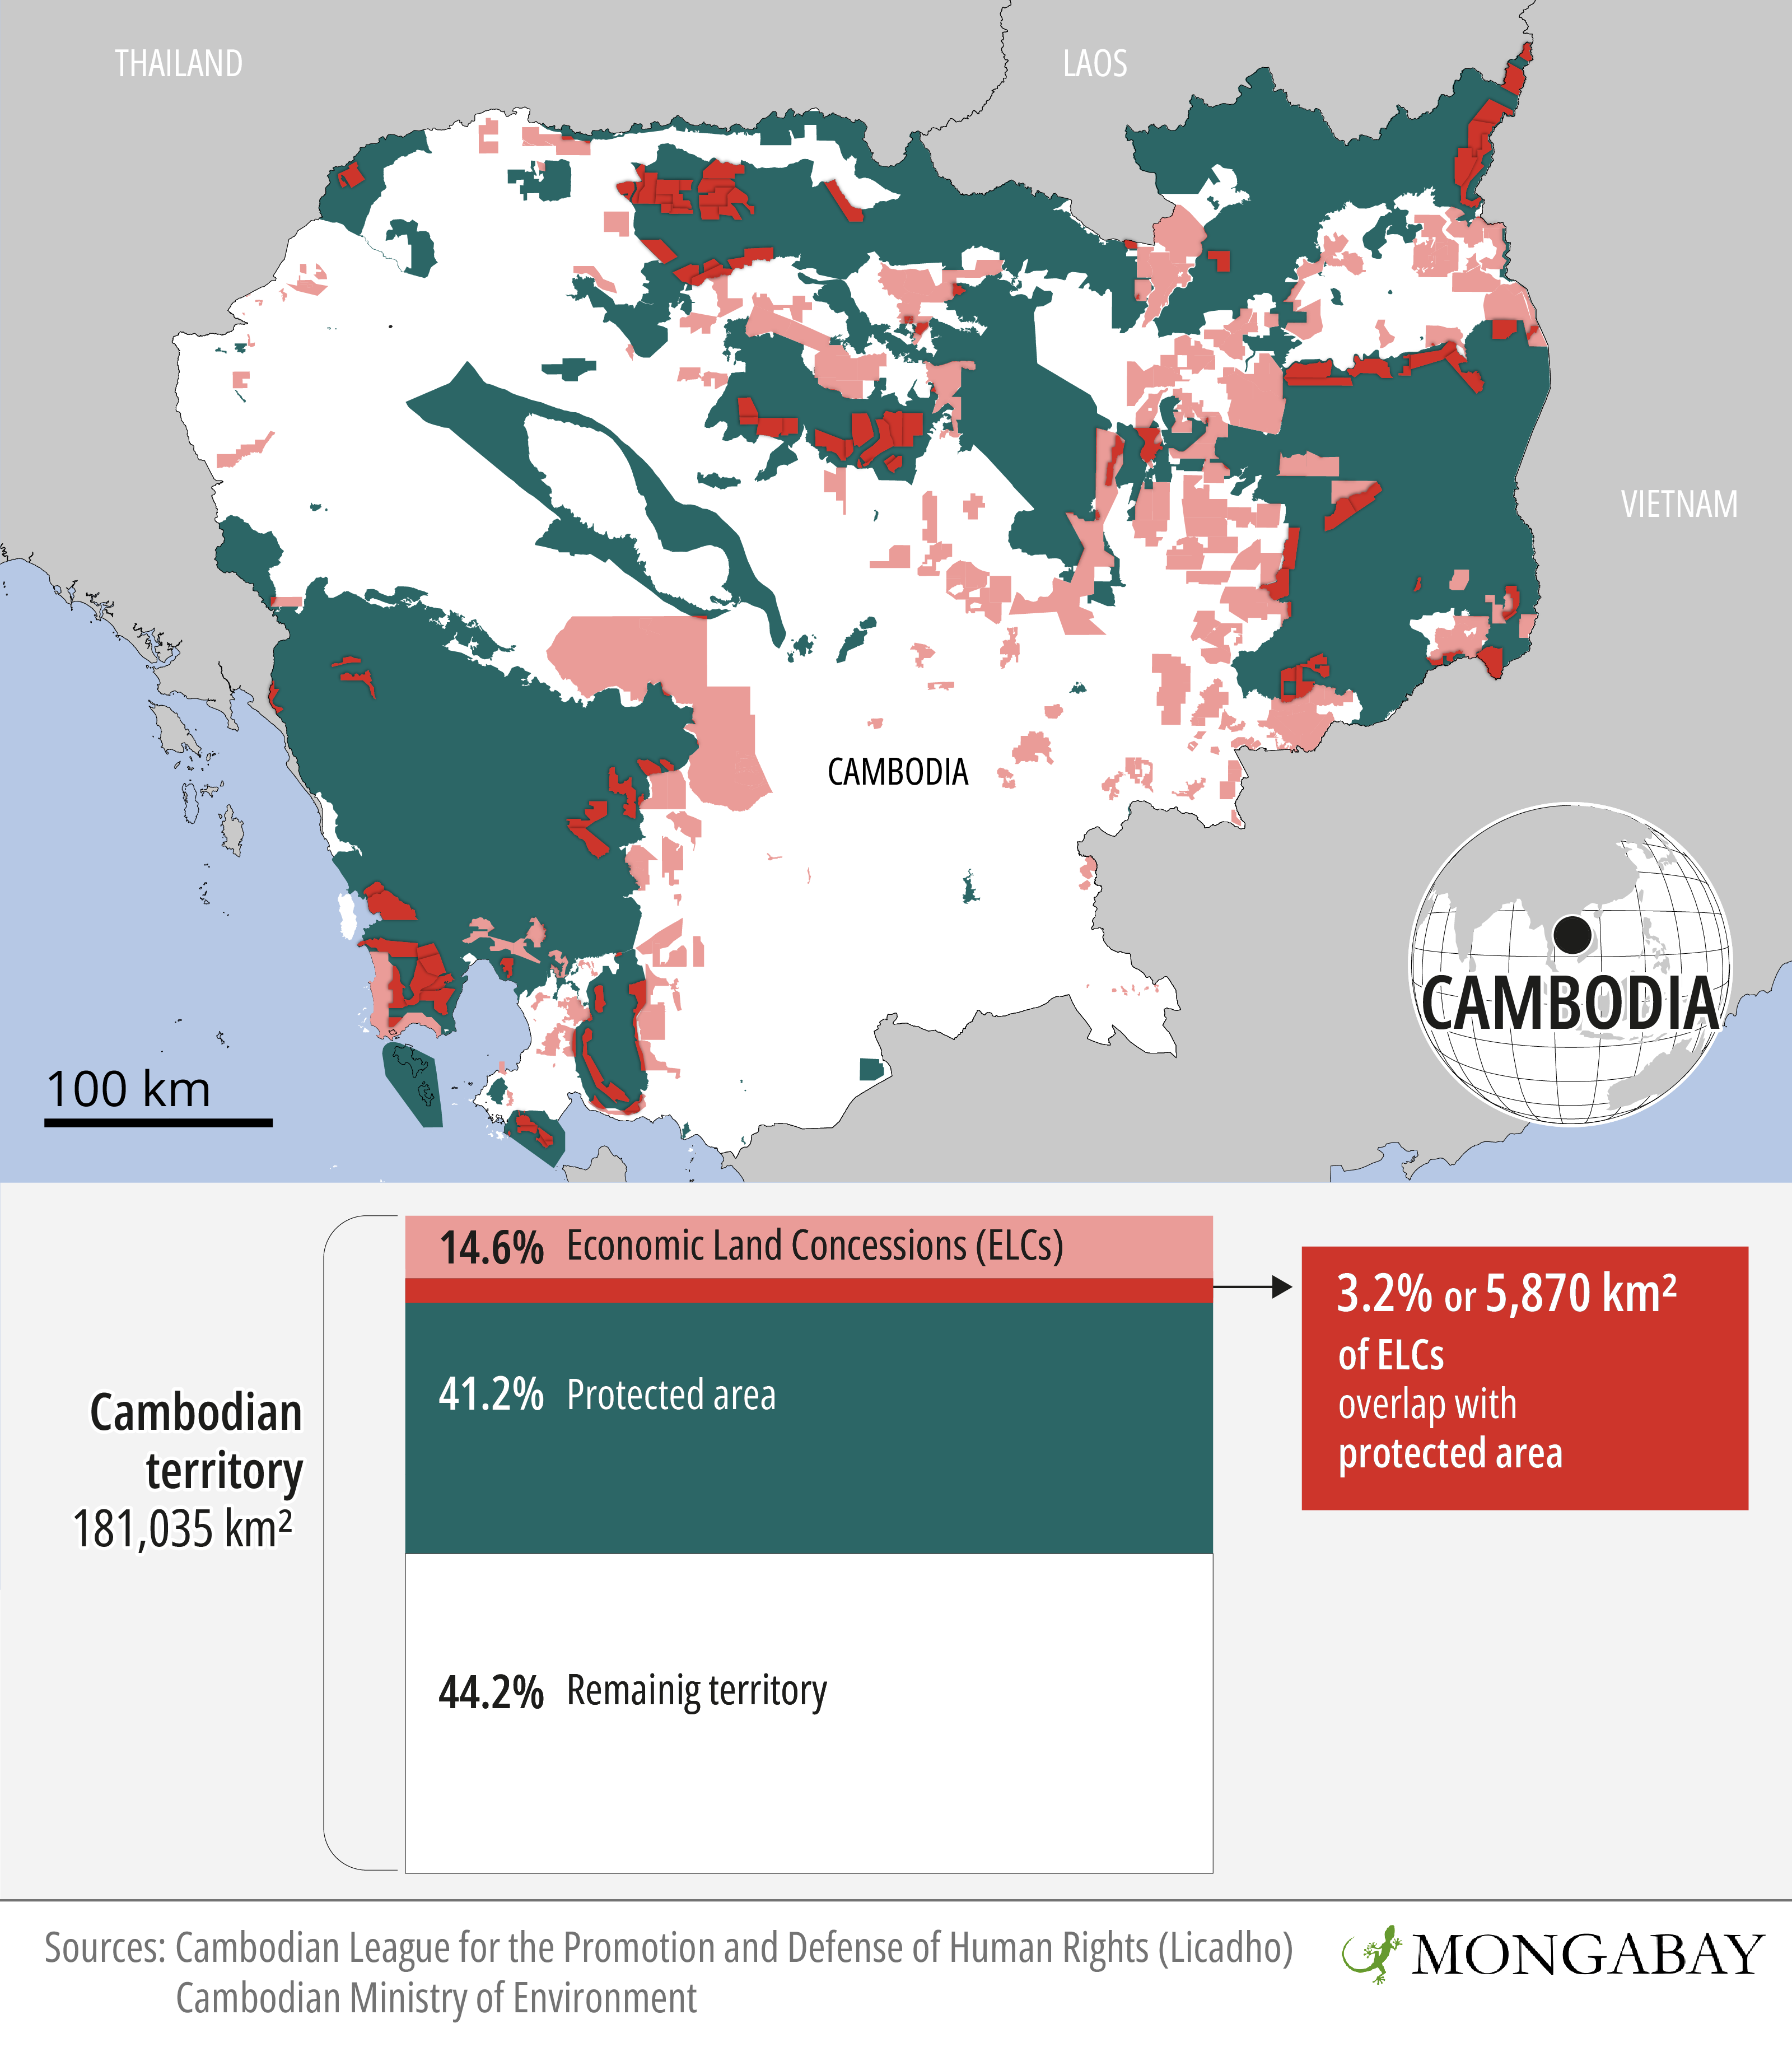 The distribution of ELCs has often been across Cambodia's most densely forested areas, with concessionaires eager to extract valuable timber. Many ELCs overlap with Cambodia's protected areas. Image by Andrés Alegría / Mongabay.